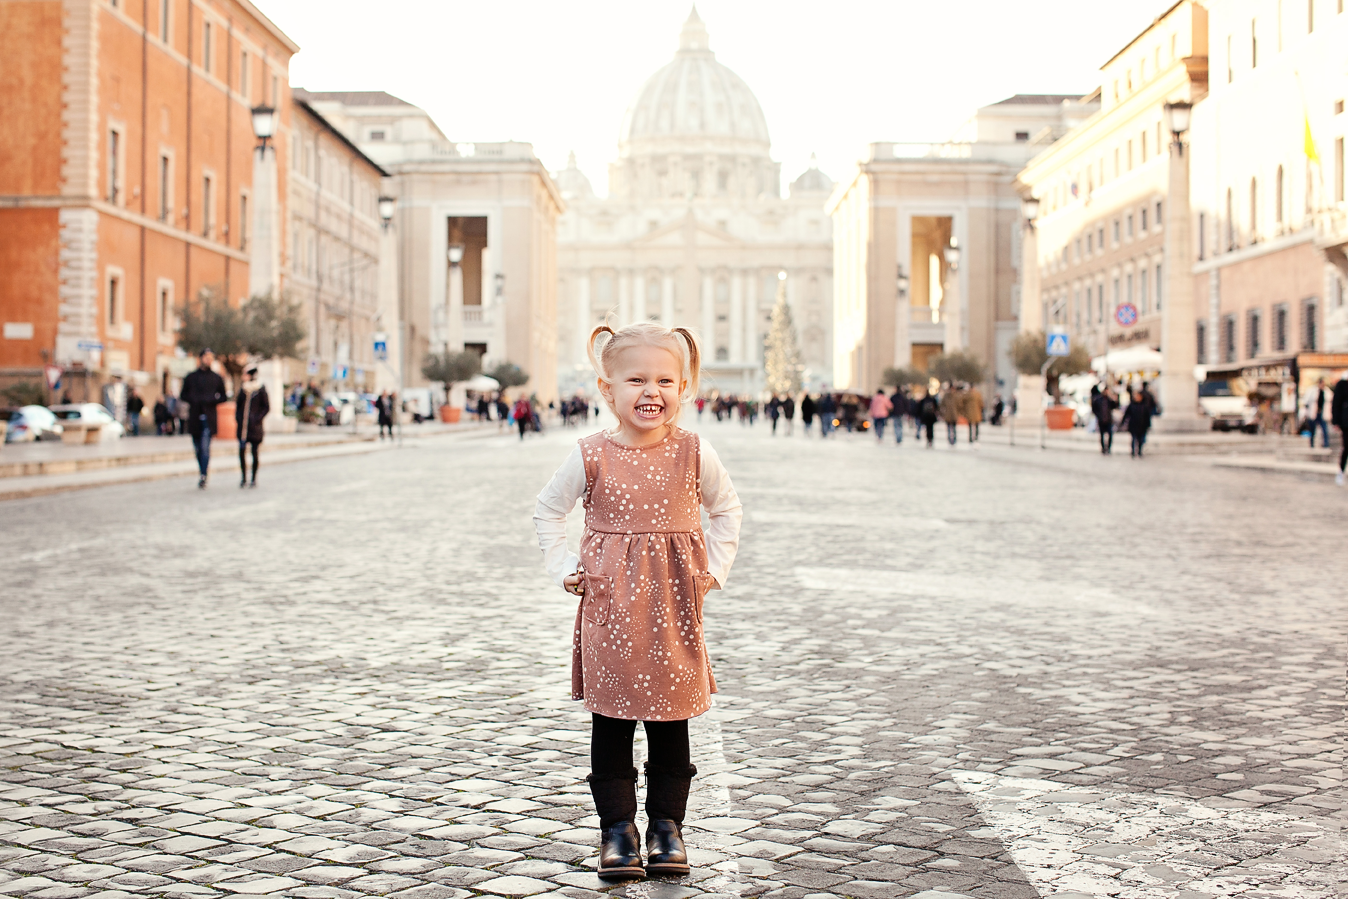 Vatican photo shoot | Take back beautiful memories from your vacation in Rome | family photographer in rome | things to do in Rome, creative travel ideas, vacation packages, personal vacation photographer, rome photographer